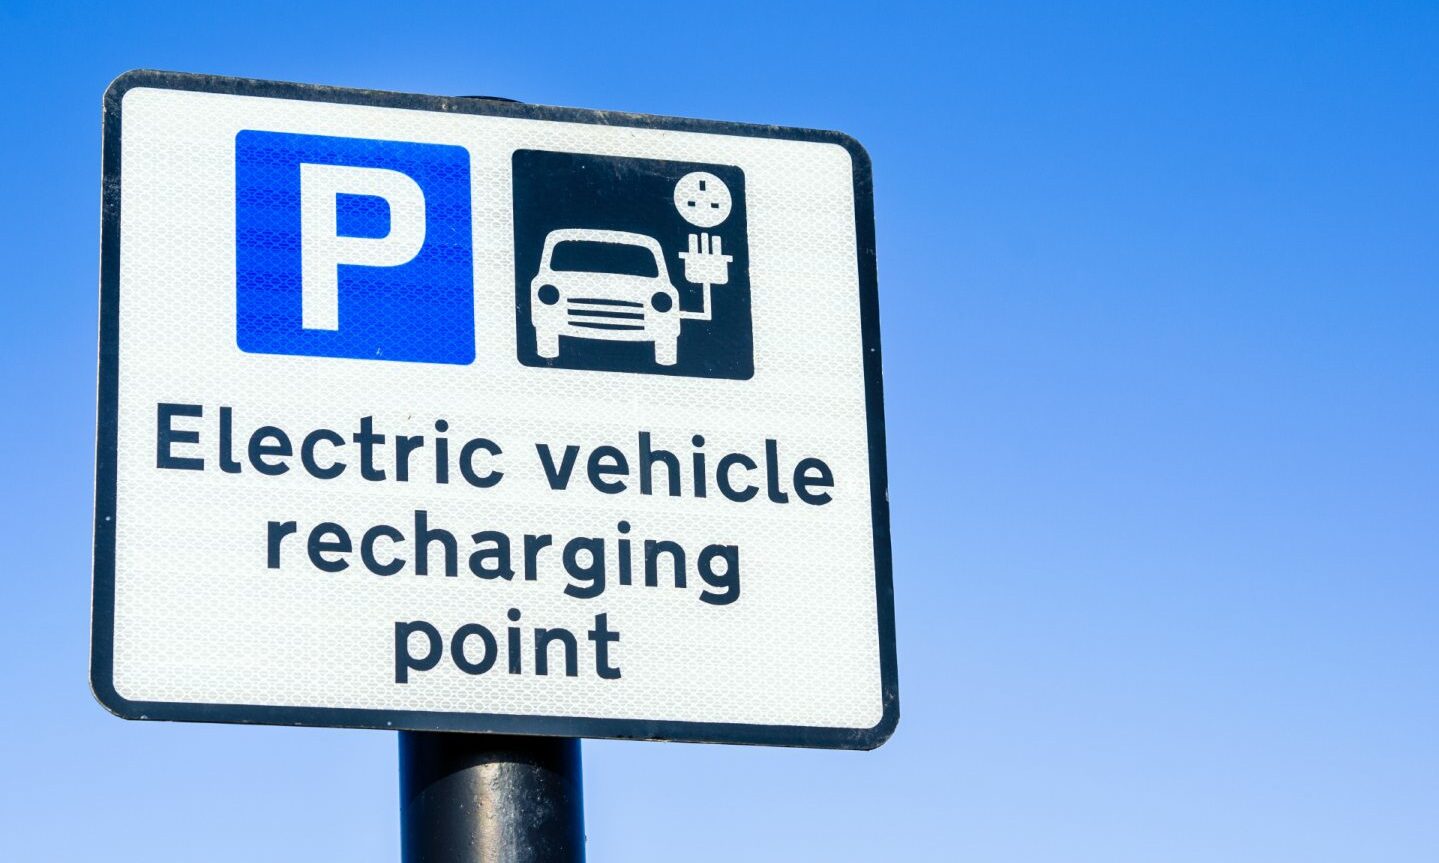 Some rural areas lack charging points for electric vehicles.